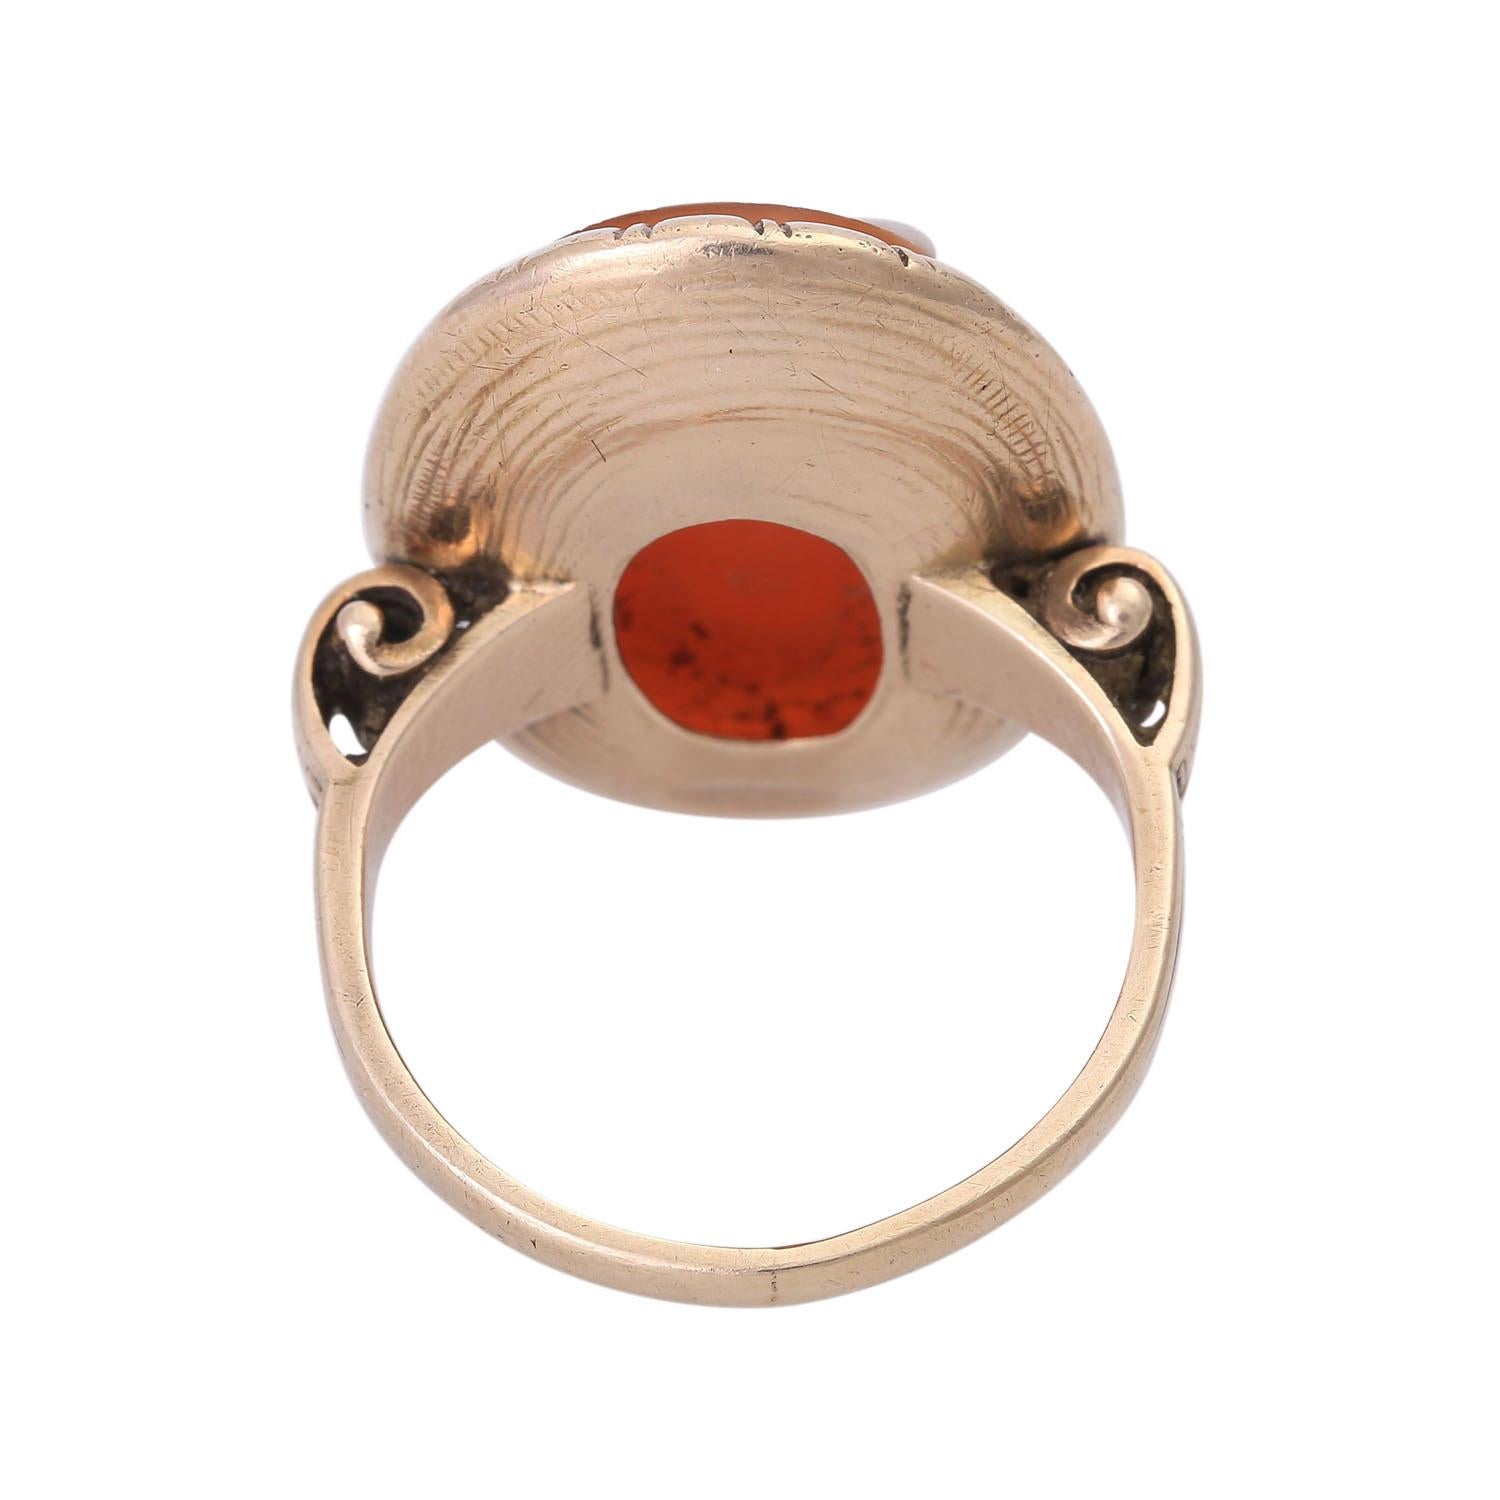 Uncut Ring with a layered stone cameo 